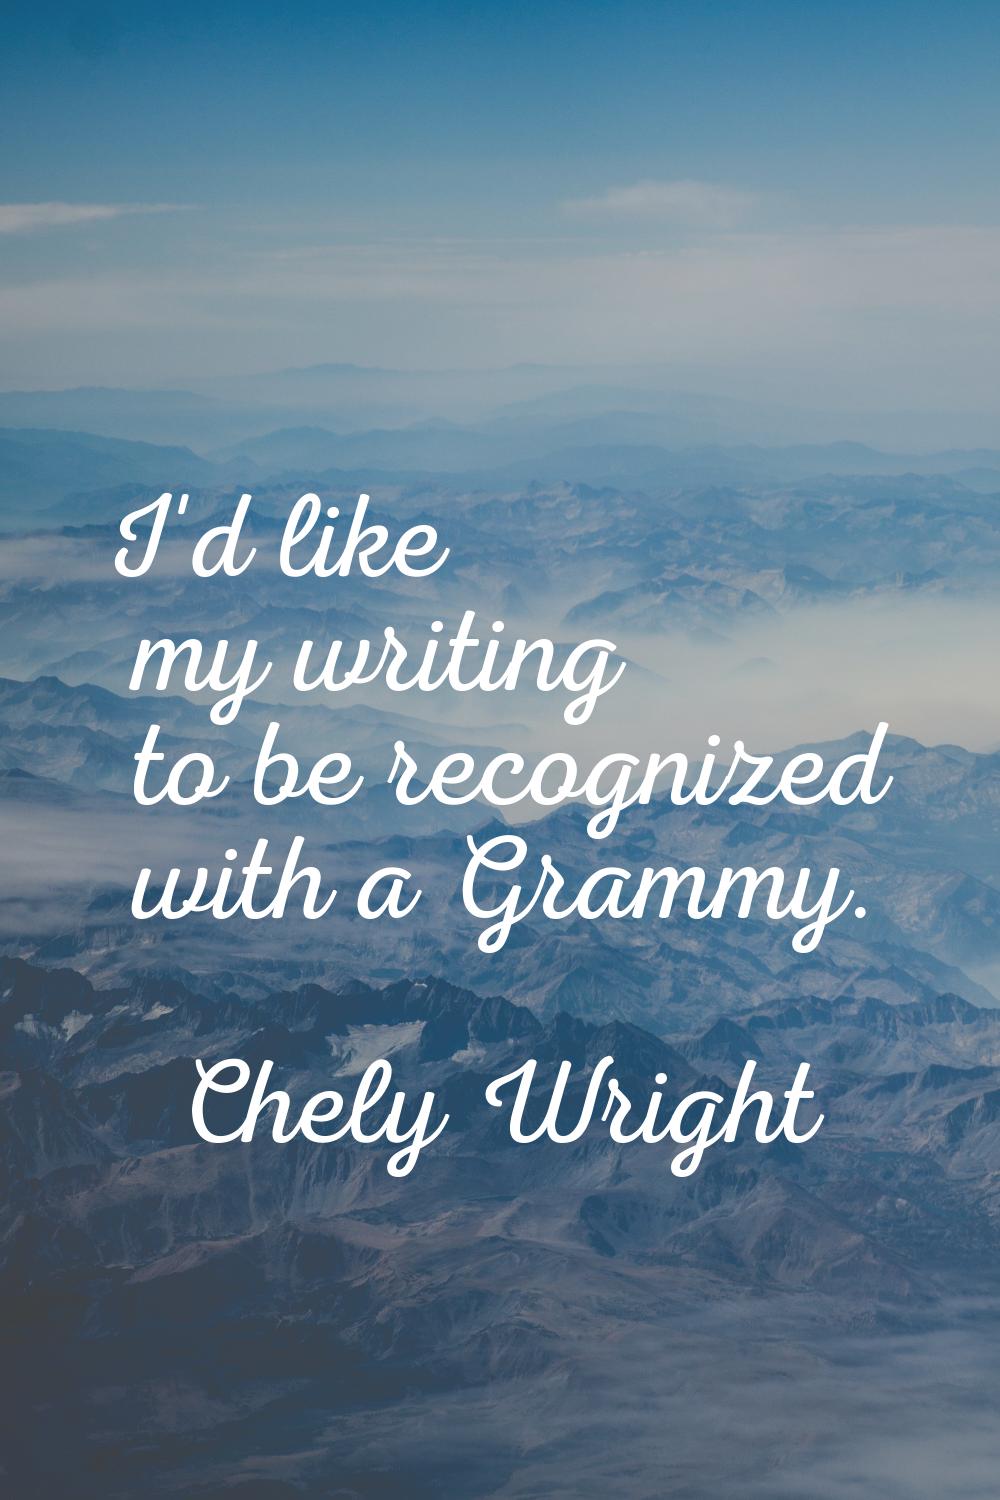 I'd like my writing to be recognized with a Grammy.